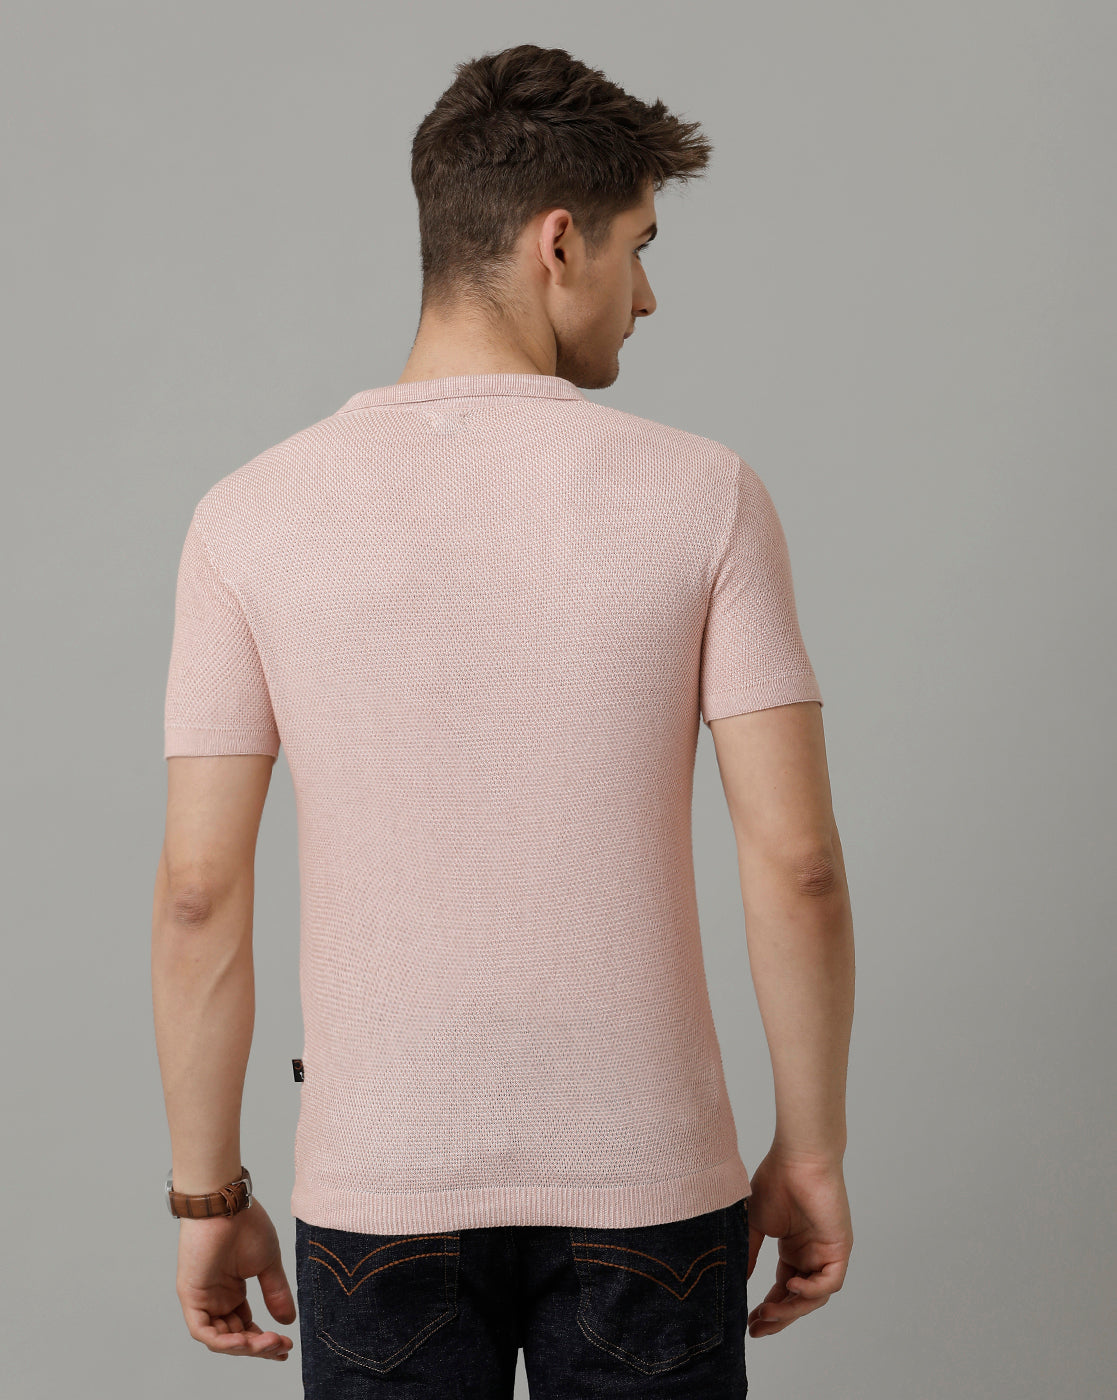 Identiti Pink Half Sleeve Solid Slim Fit Cotton Casual Polo T-Shirt For Men.